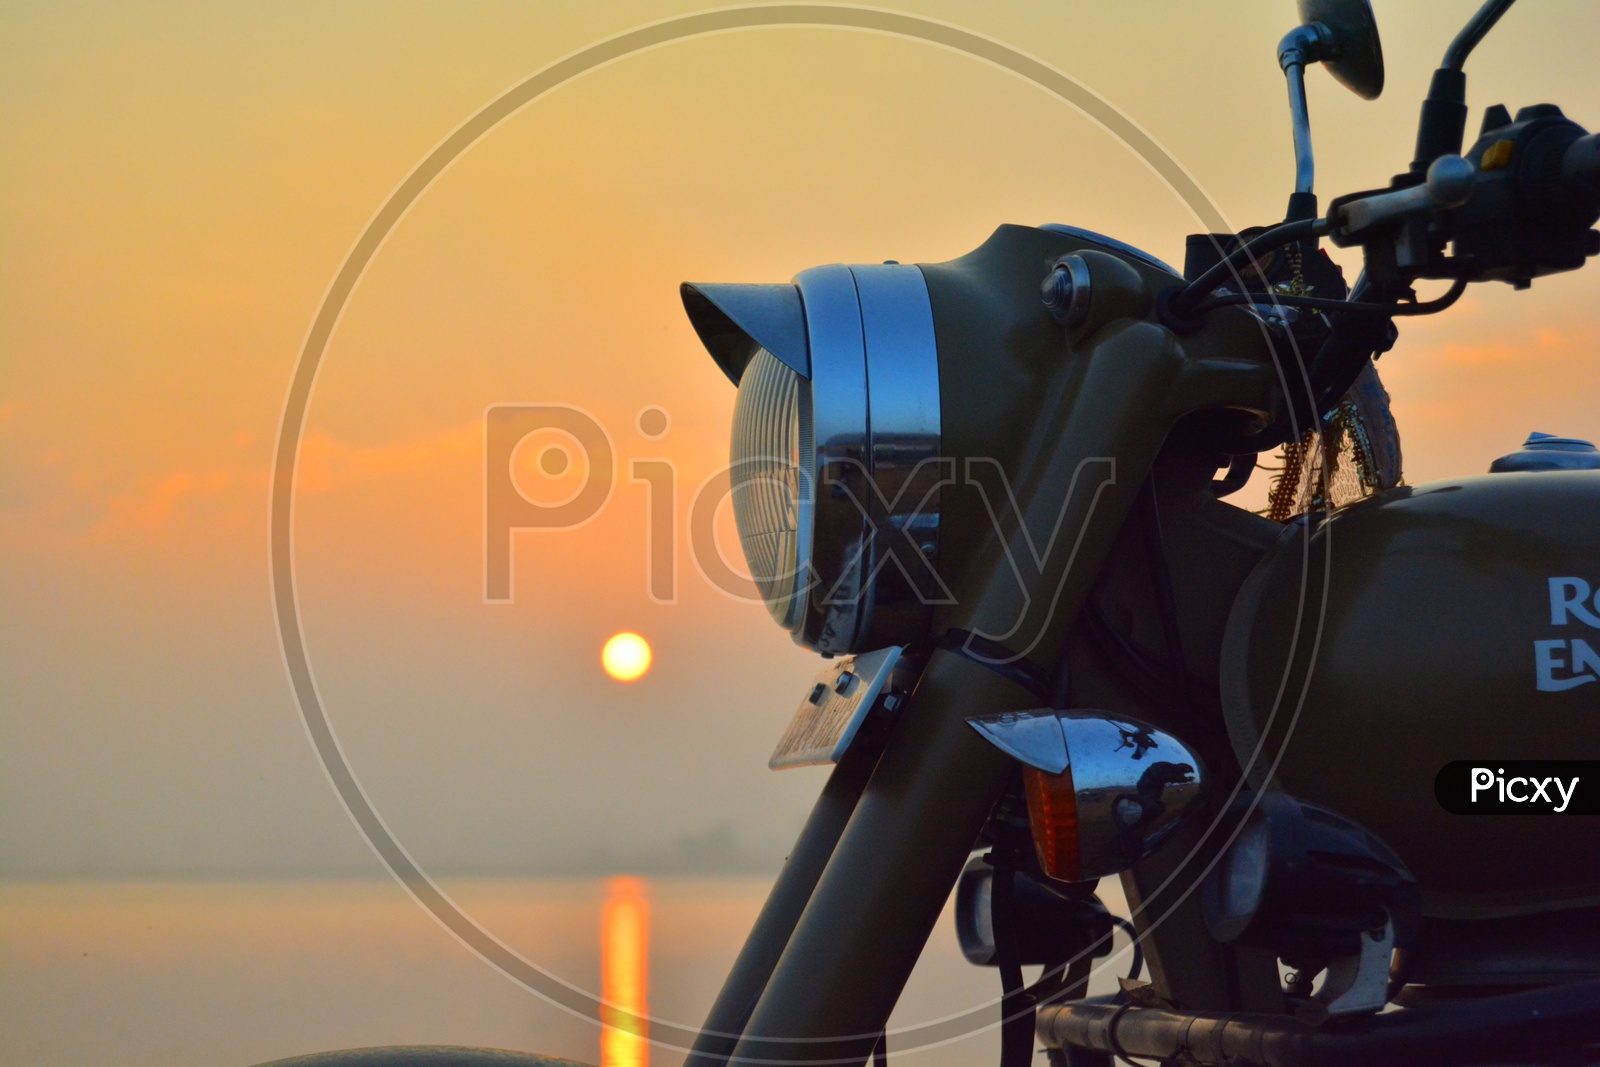 Sunrise with royal Enfield